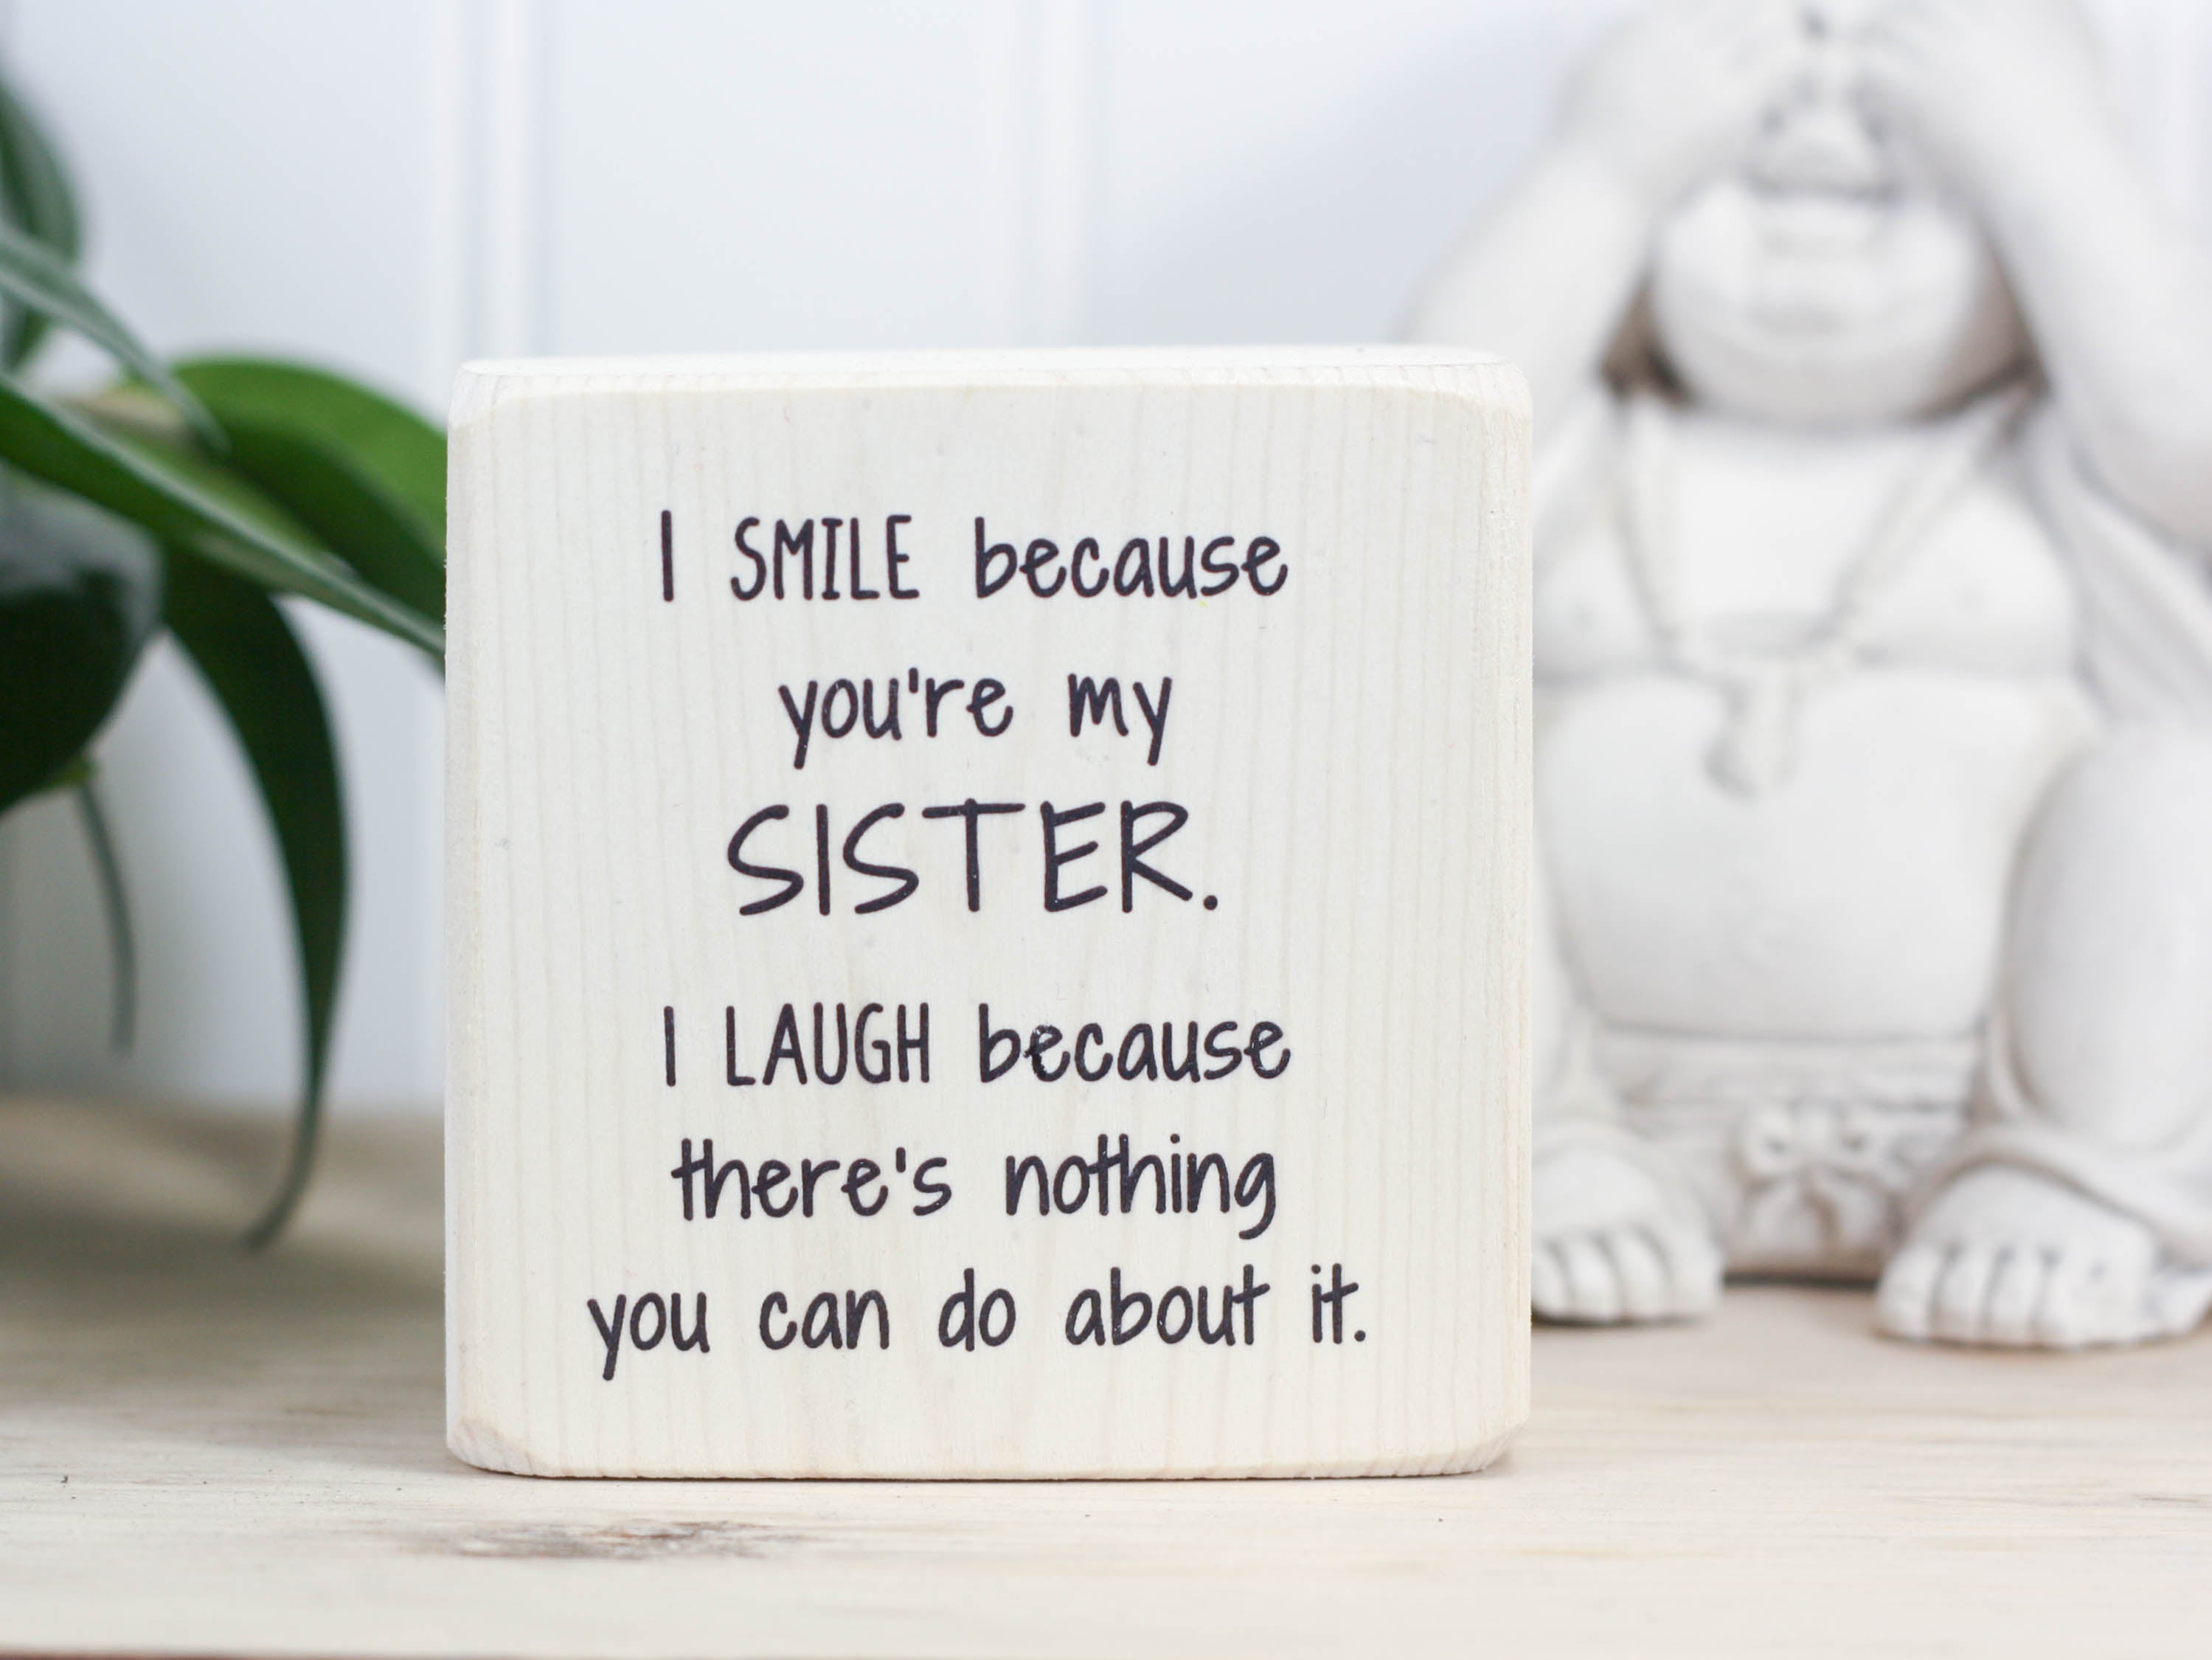 Small, freestanding, whitewash, solid wood sign with a funny saying on it "I smile because you're my sister. I laugh because there's nothing you can do about it."